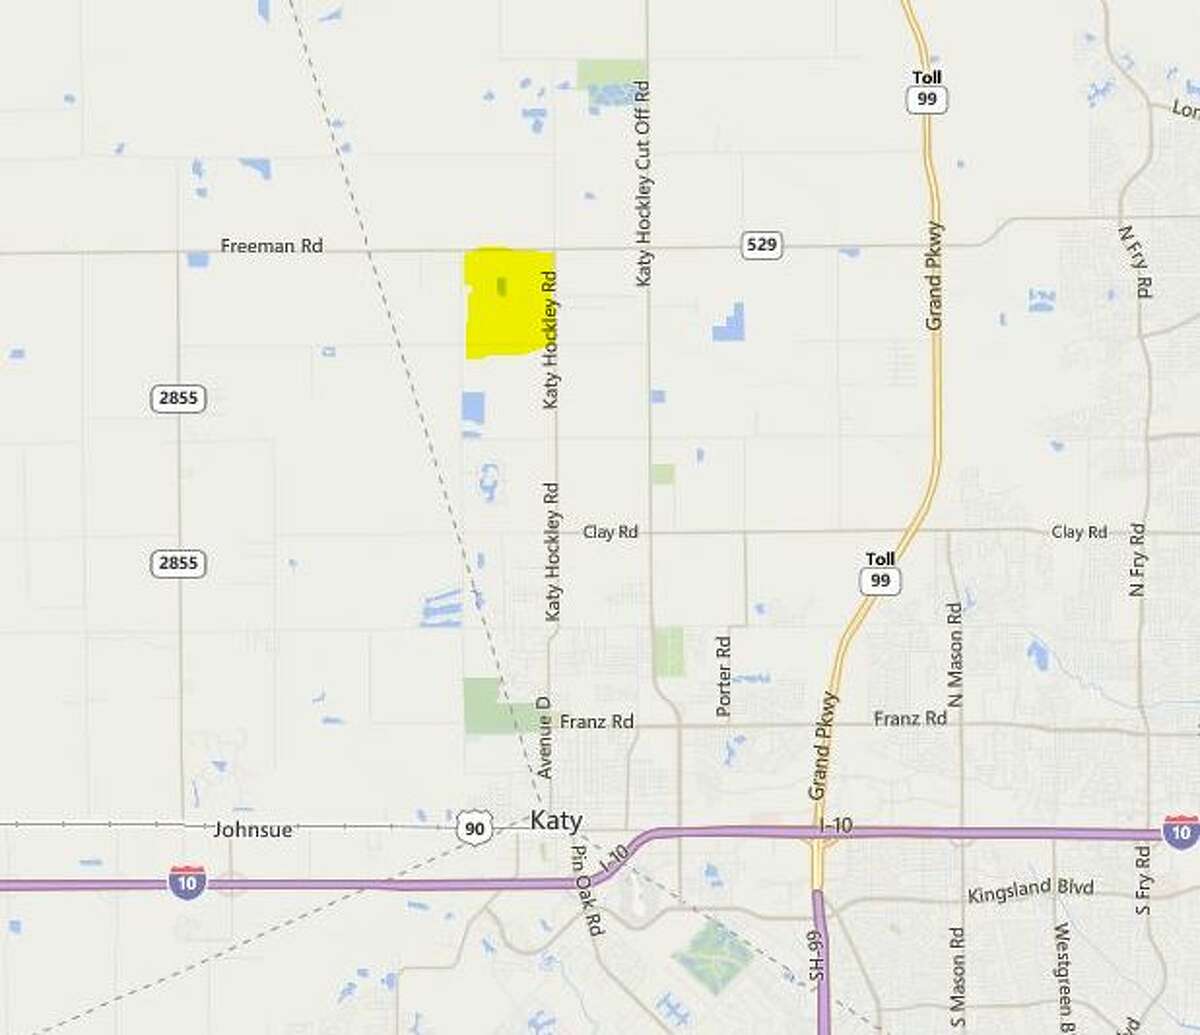 John S. Beeson, John Stephen Ford, Sr. and Steven A. Webster have purchased 620.6 acres of land bordered by FM 529, Katy Hockley Road, Beckendorff Road and Pitts Road. The property was sold by the Beckendorff family.